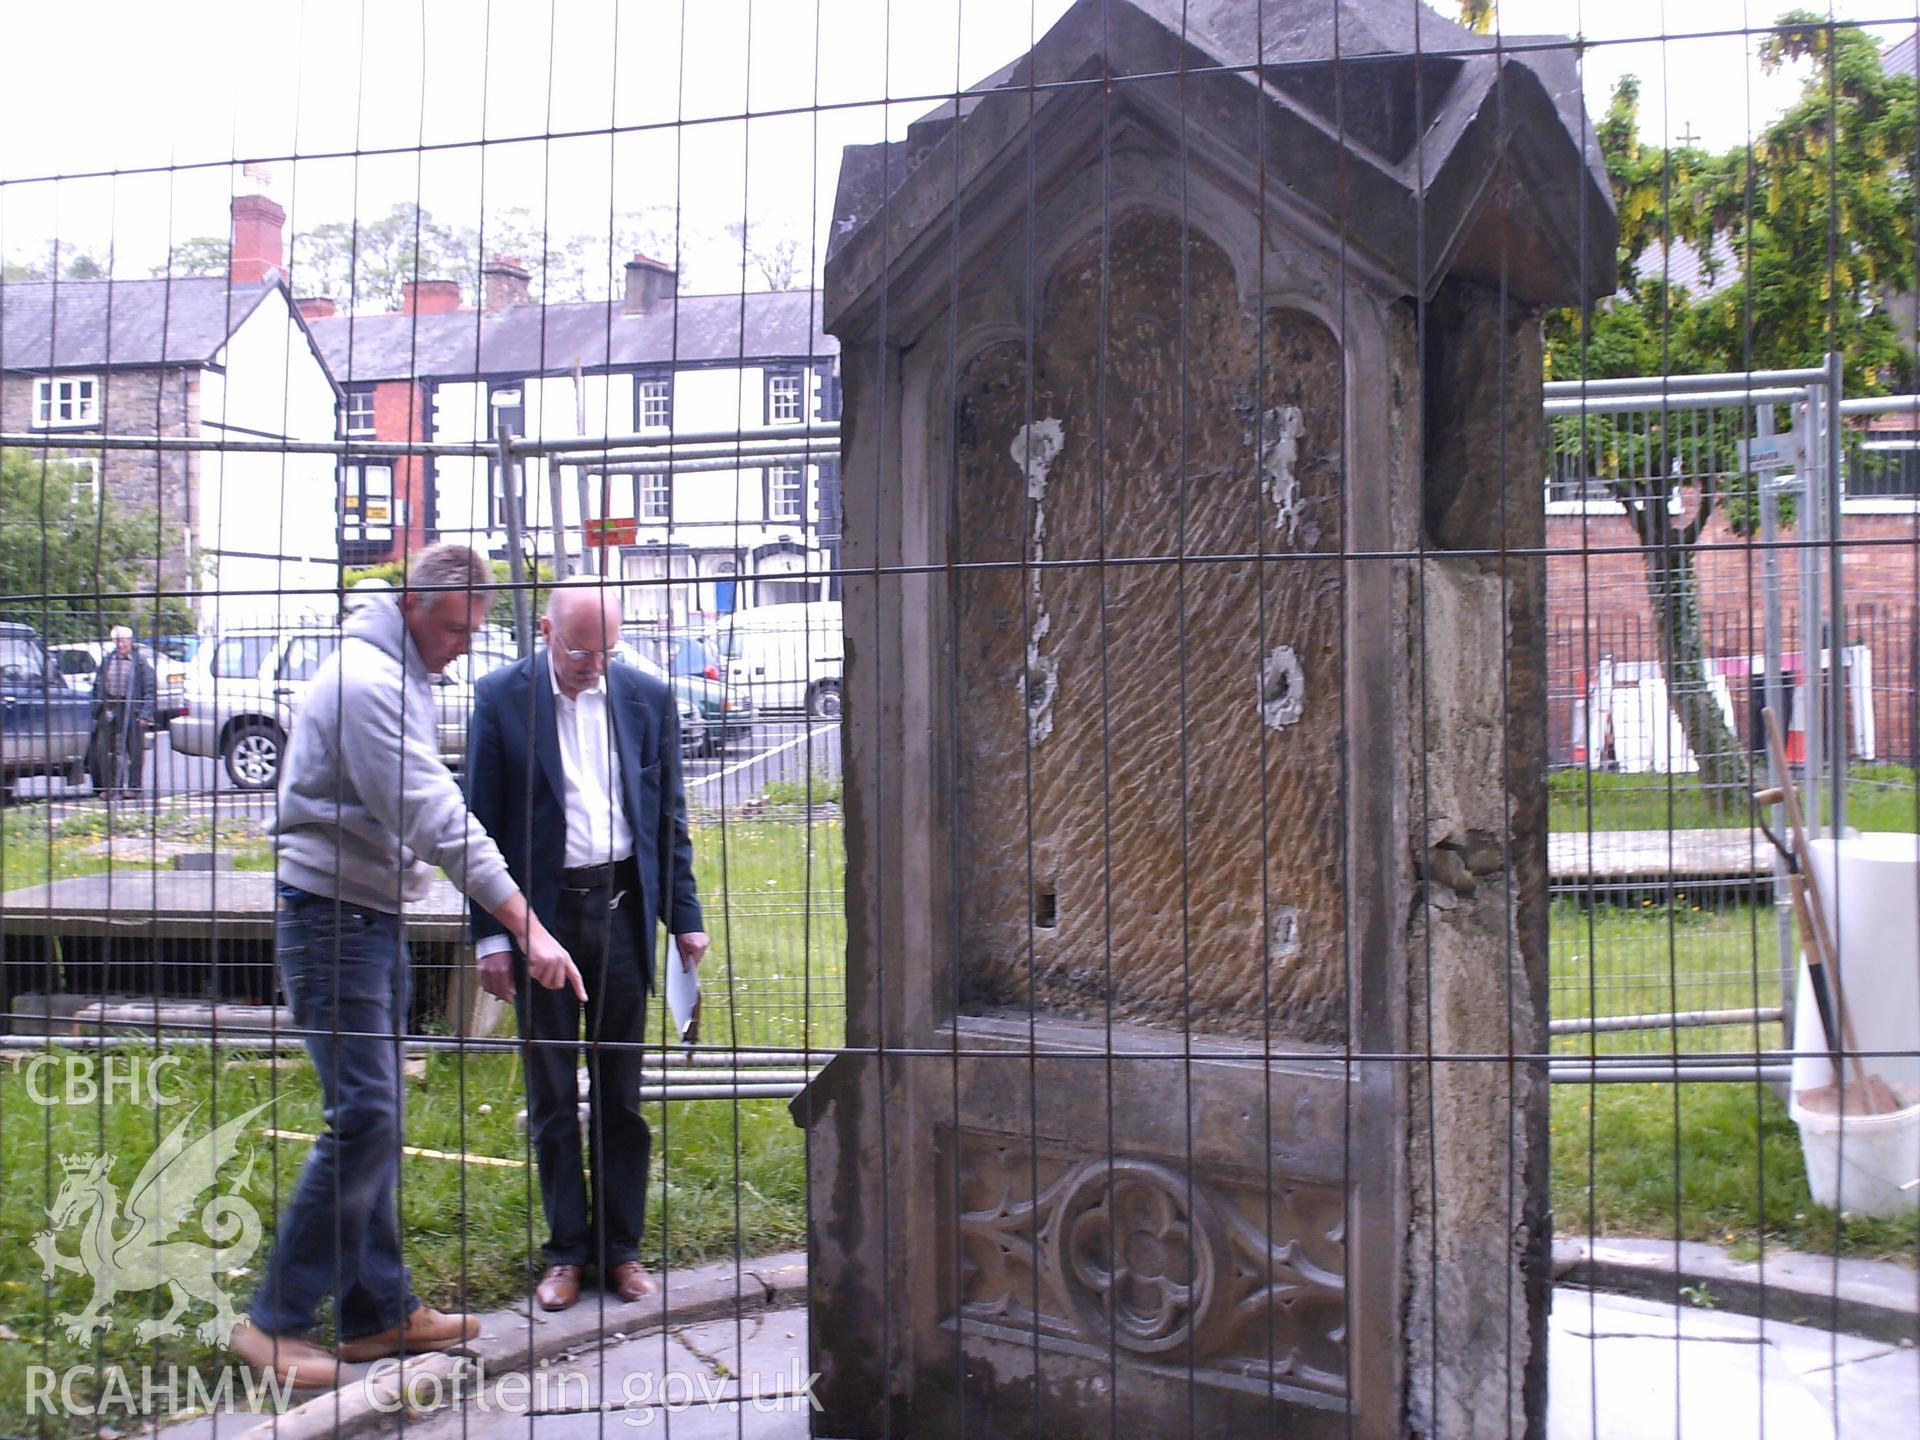 Digital image showing the memorial plaques and corner pillars being removed.